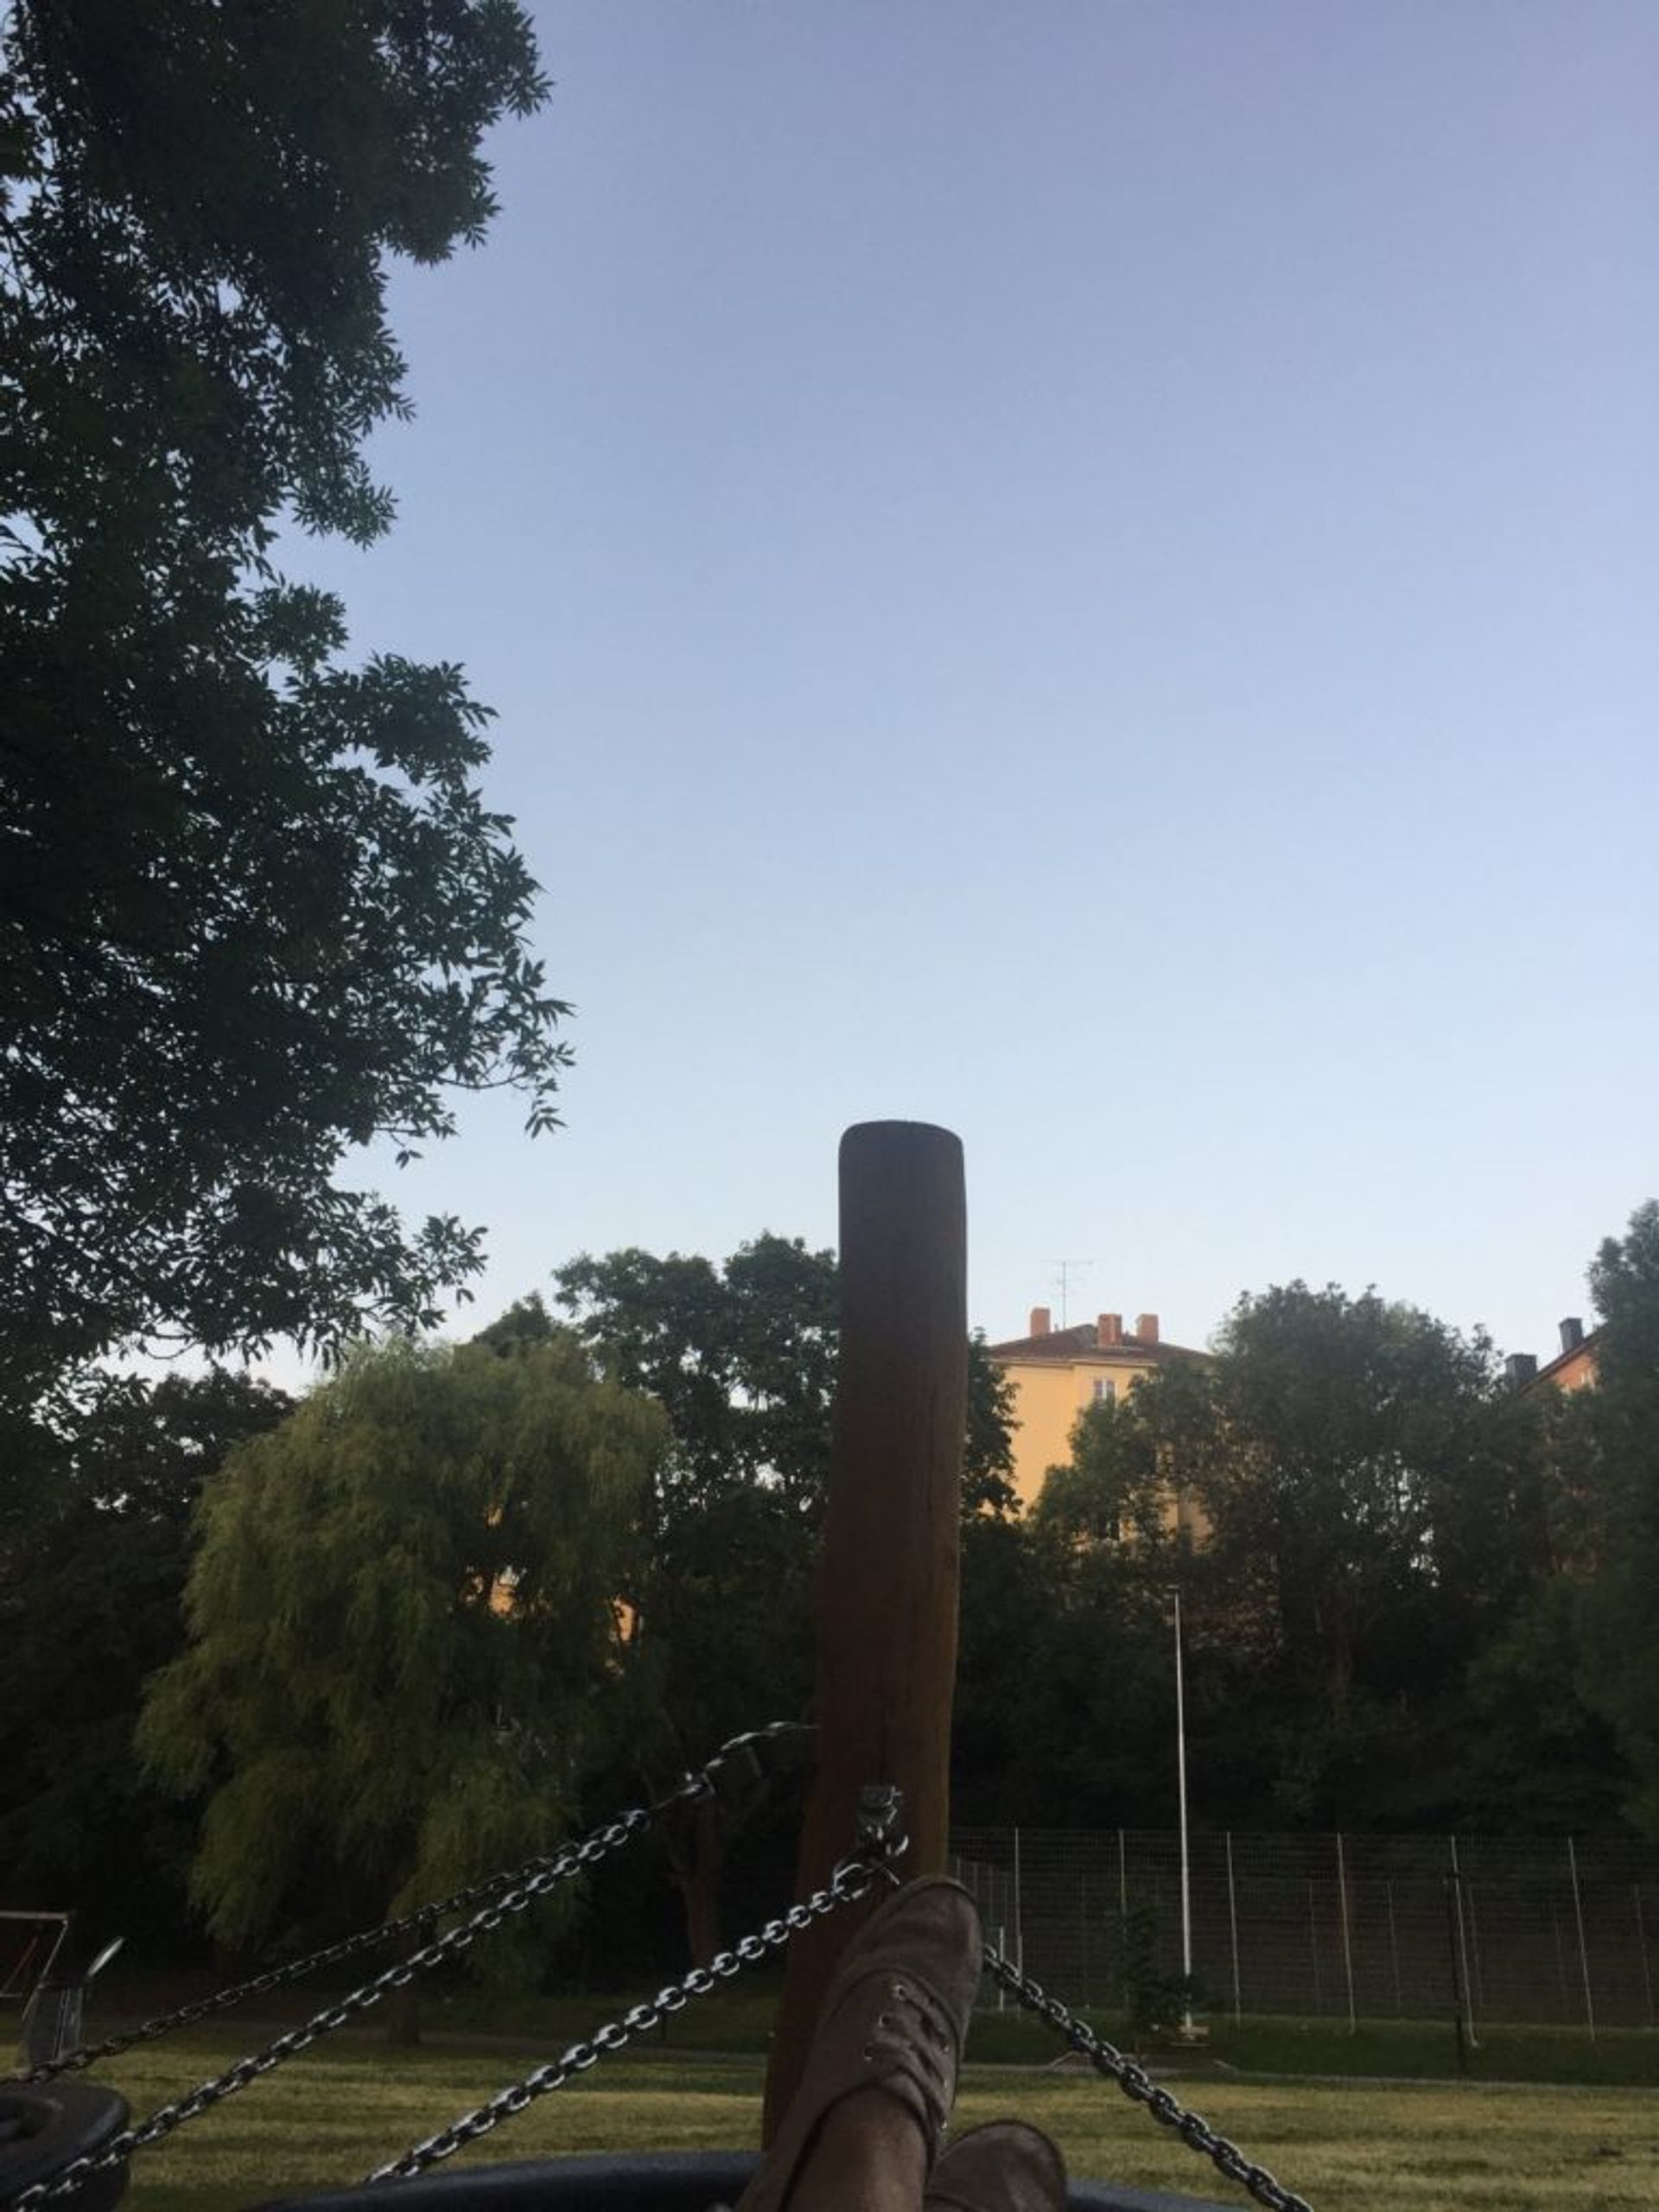 The referred to hammock-morning, 3:30am in Stockholm